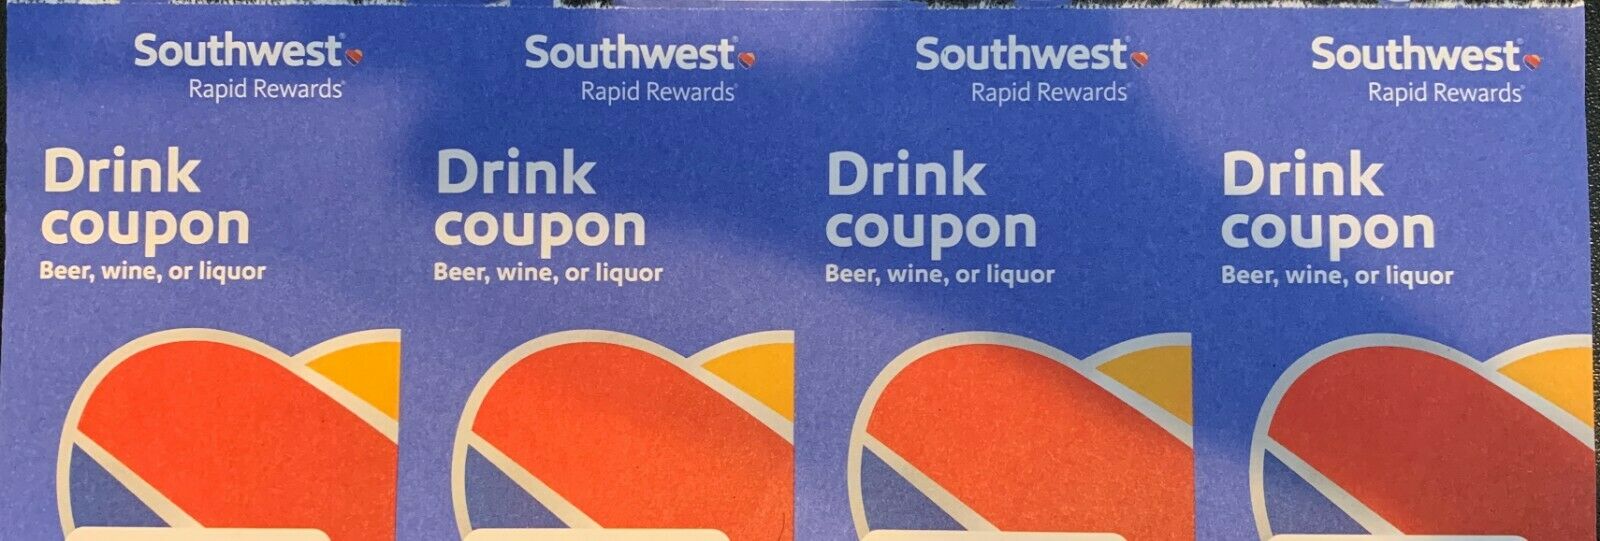 4 Southwest Drink Coupons Expire March 31st 2019 (within 30 days)